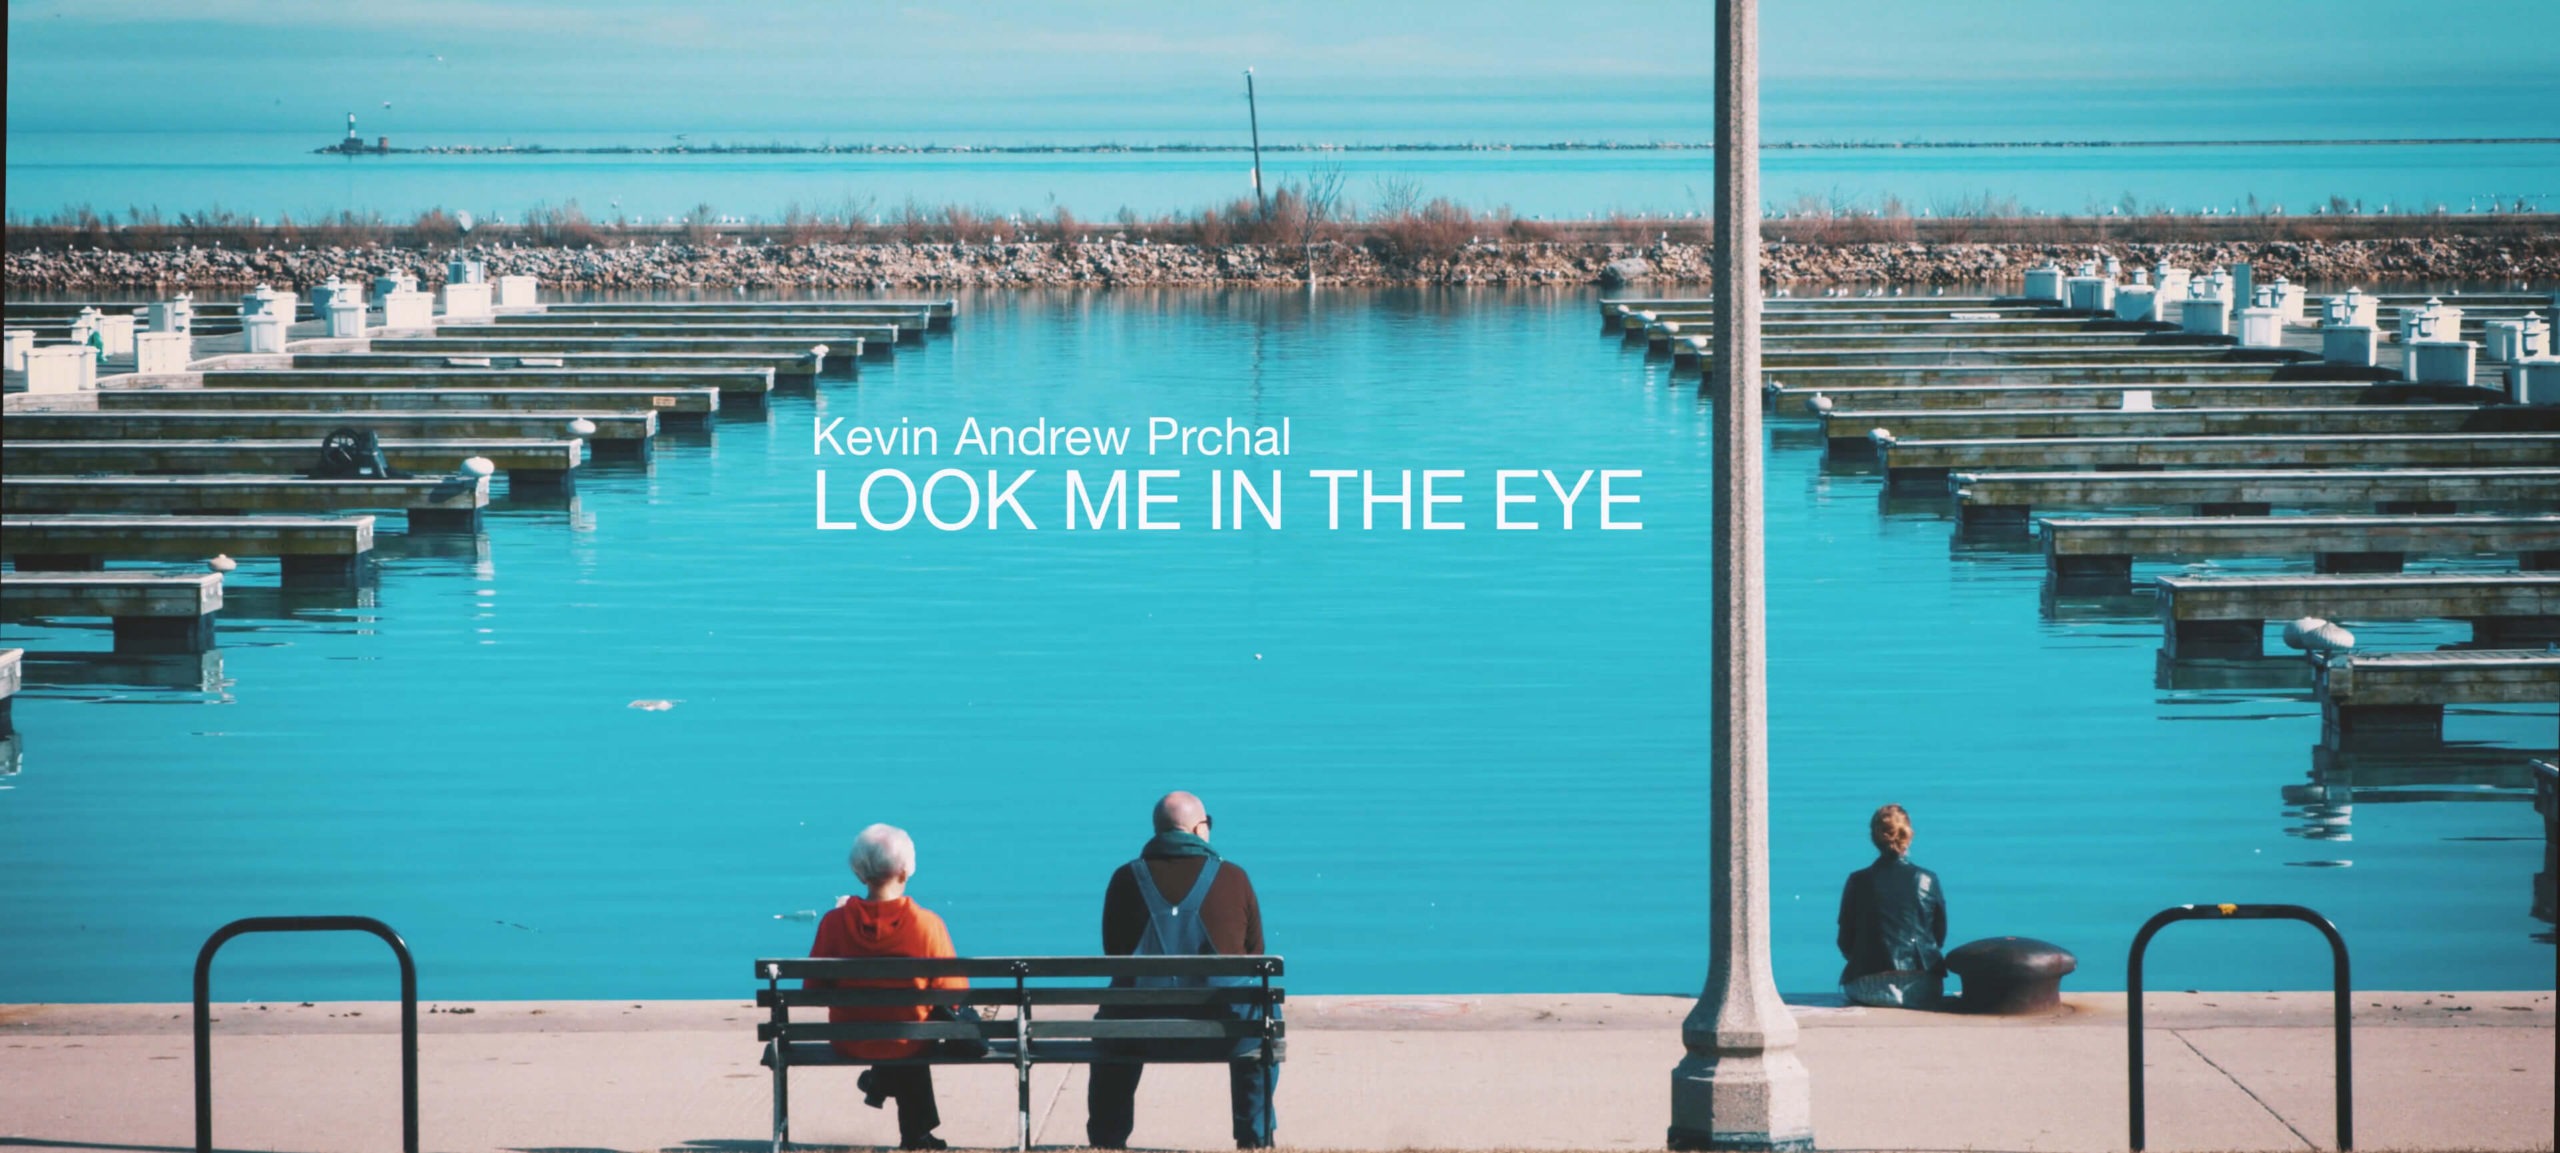 Kevin Andrew Prchal – “Look Me in the Eye”